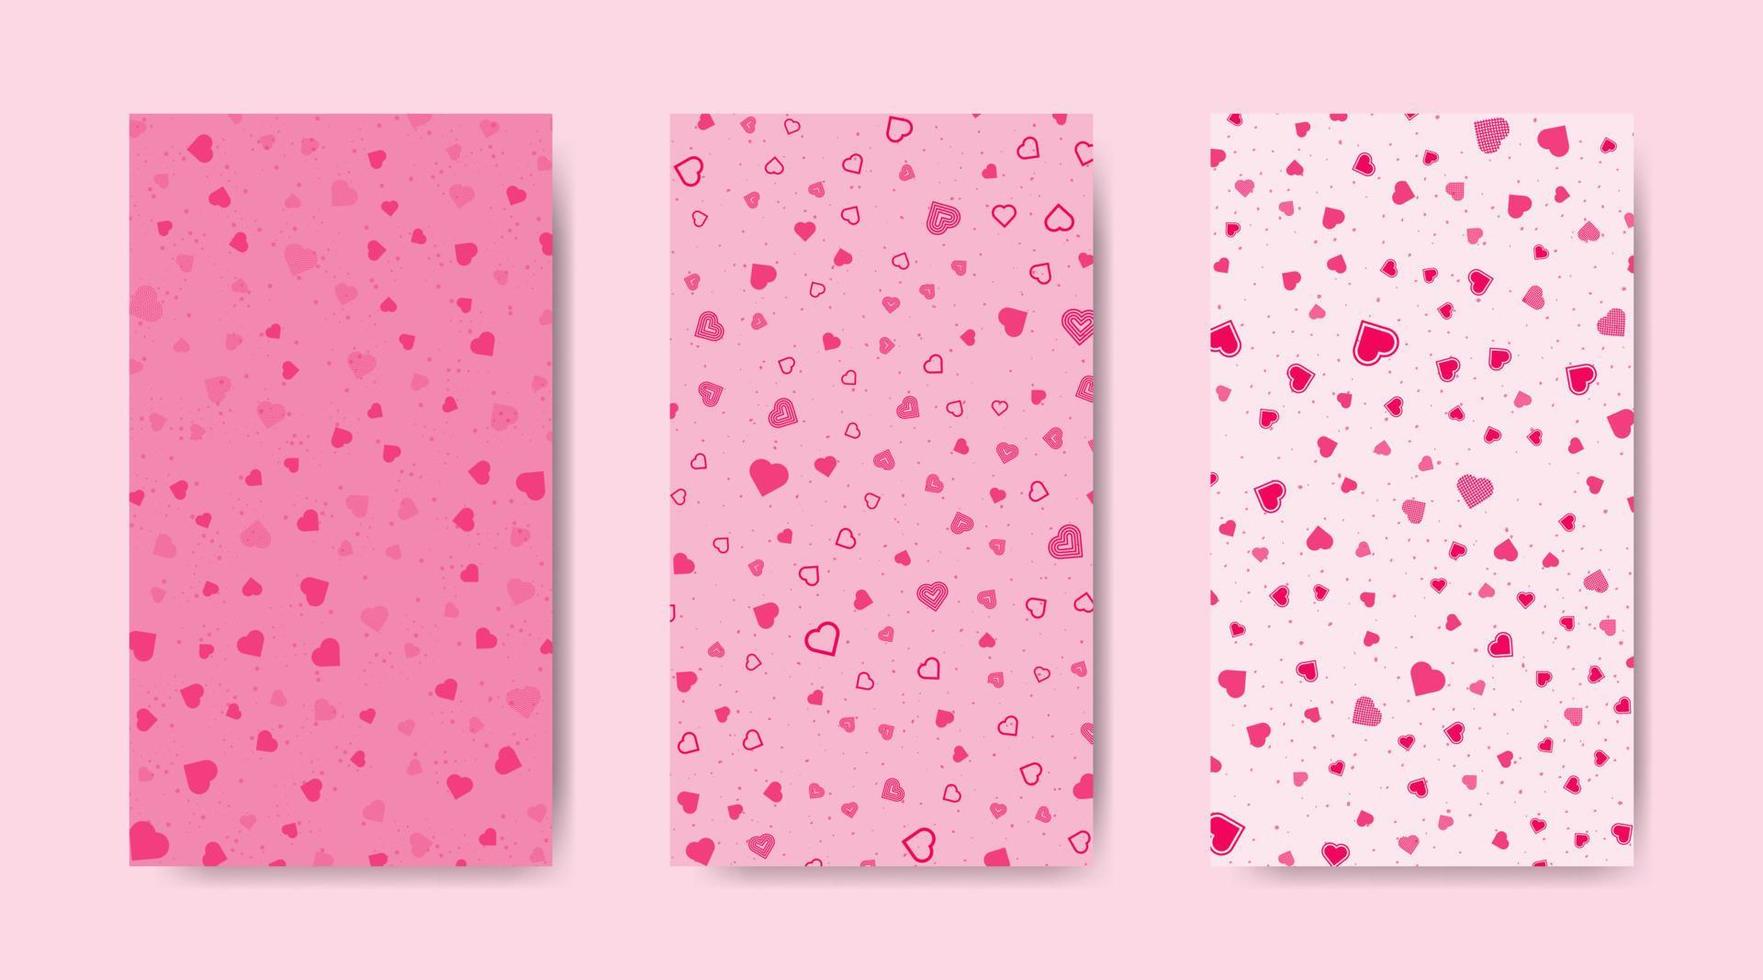 Flat design with heart and love elements for valentines day pattern collection vector